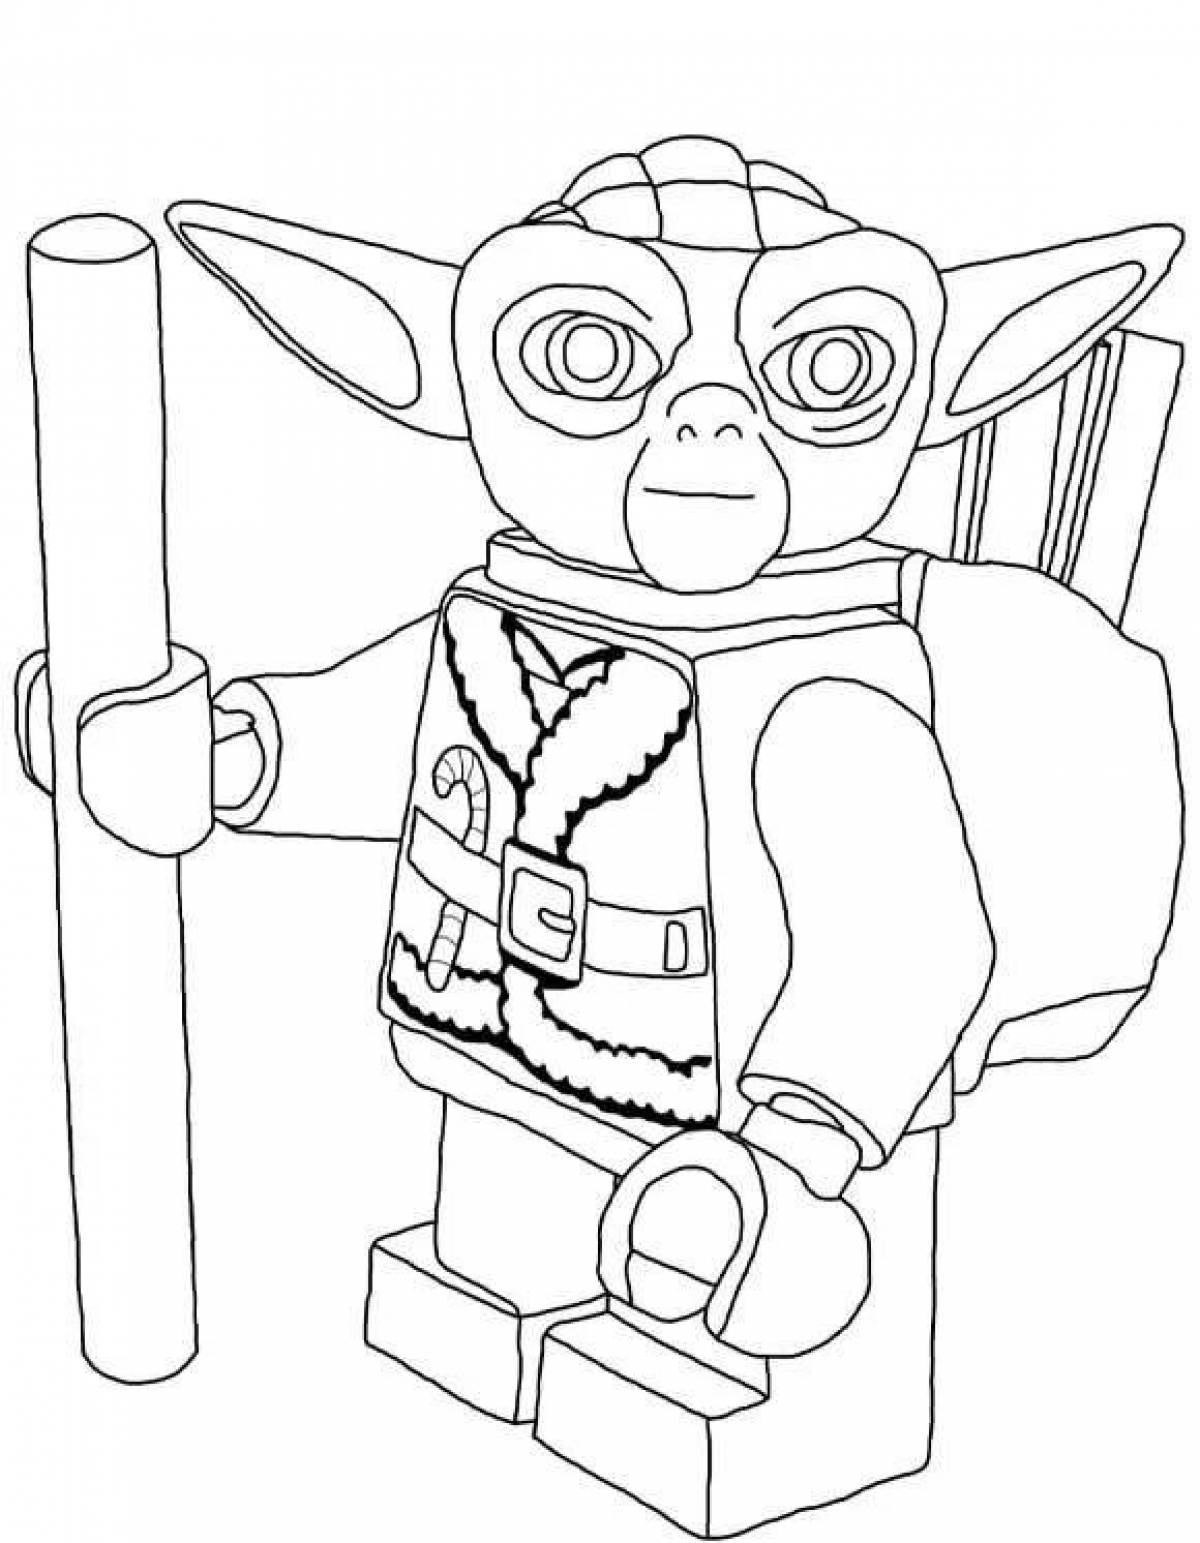 Lego star wars dynamic coloring book